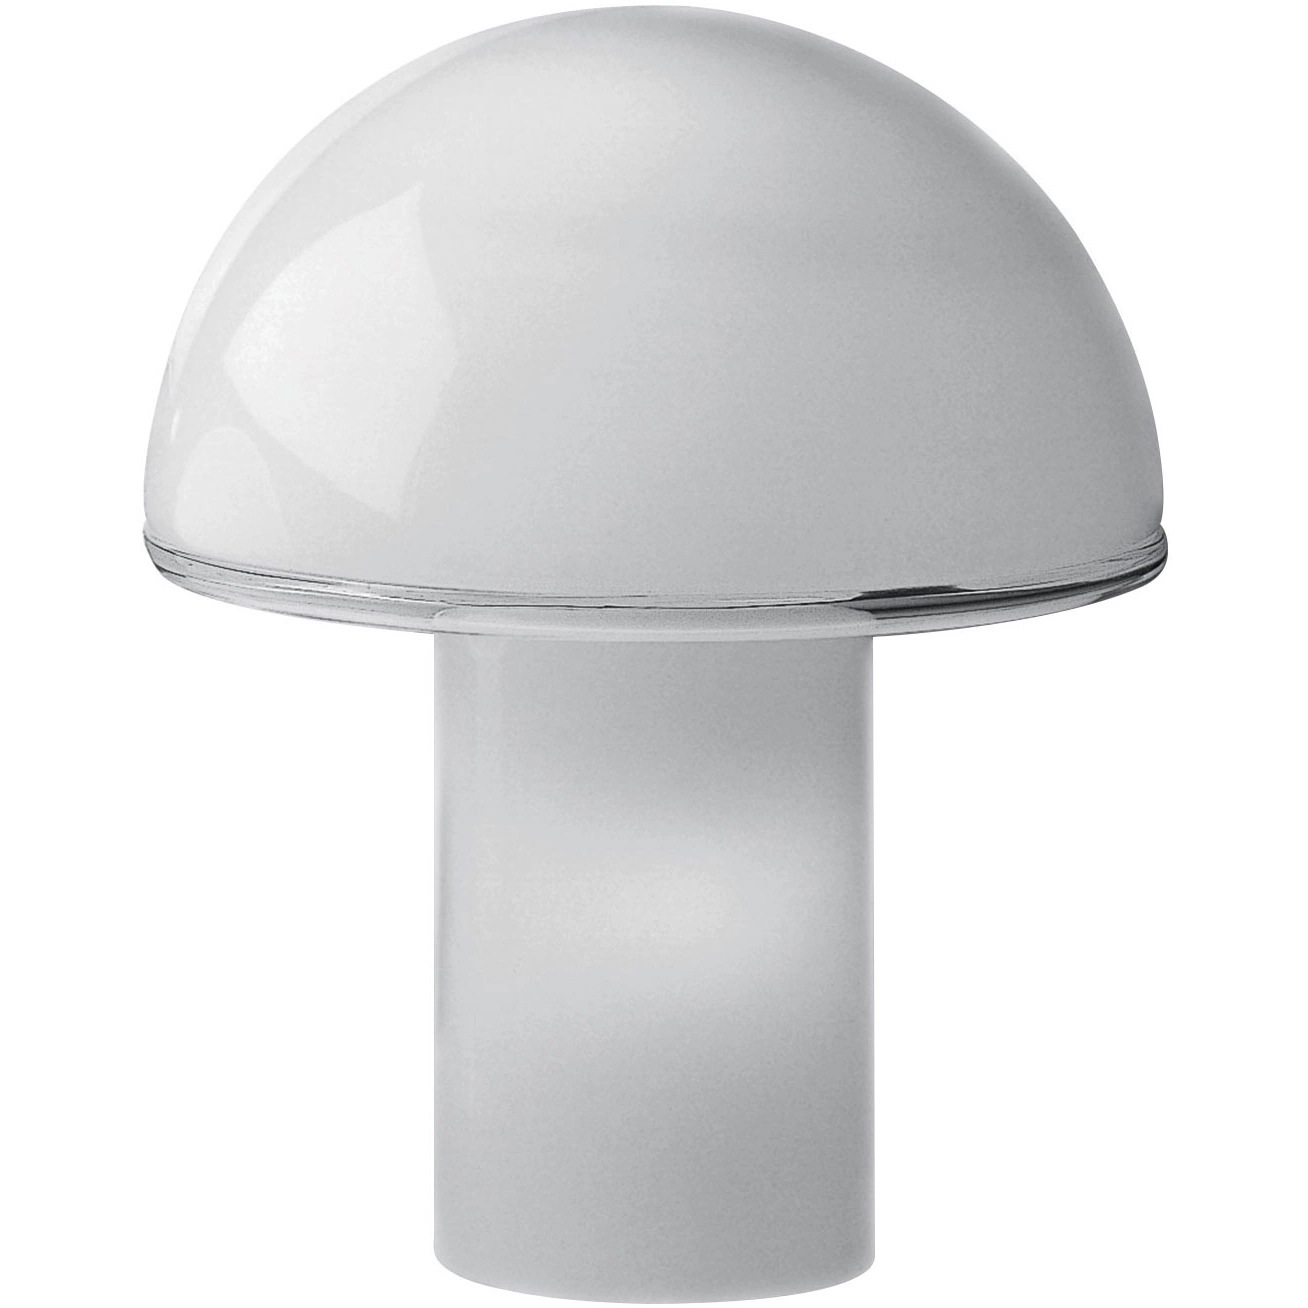 Onfale Table Lamp, 280 mm